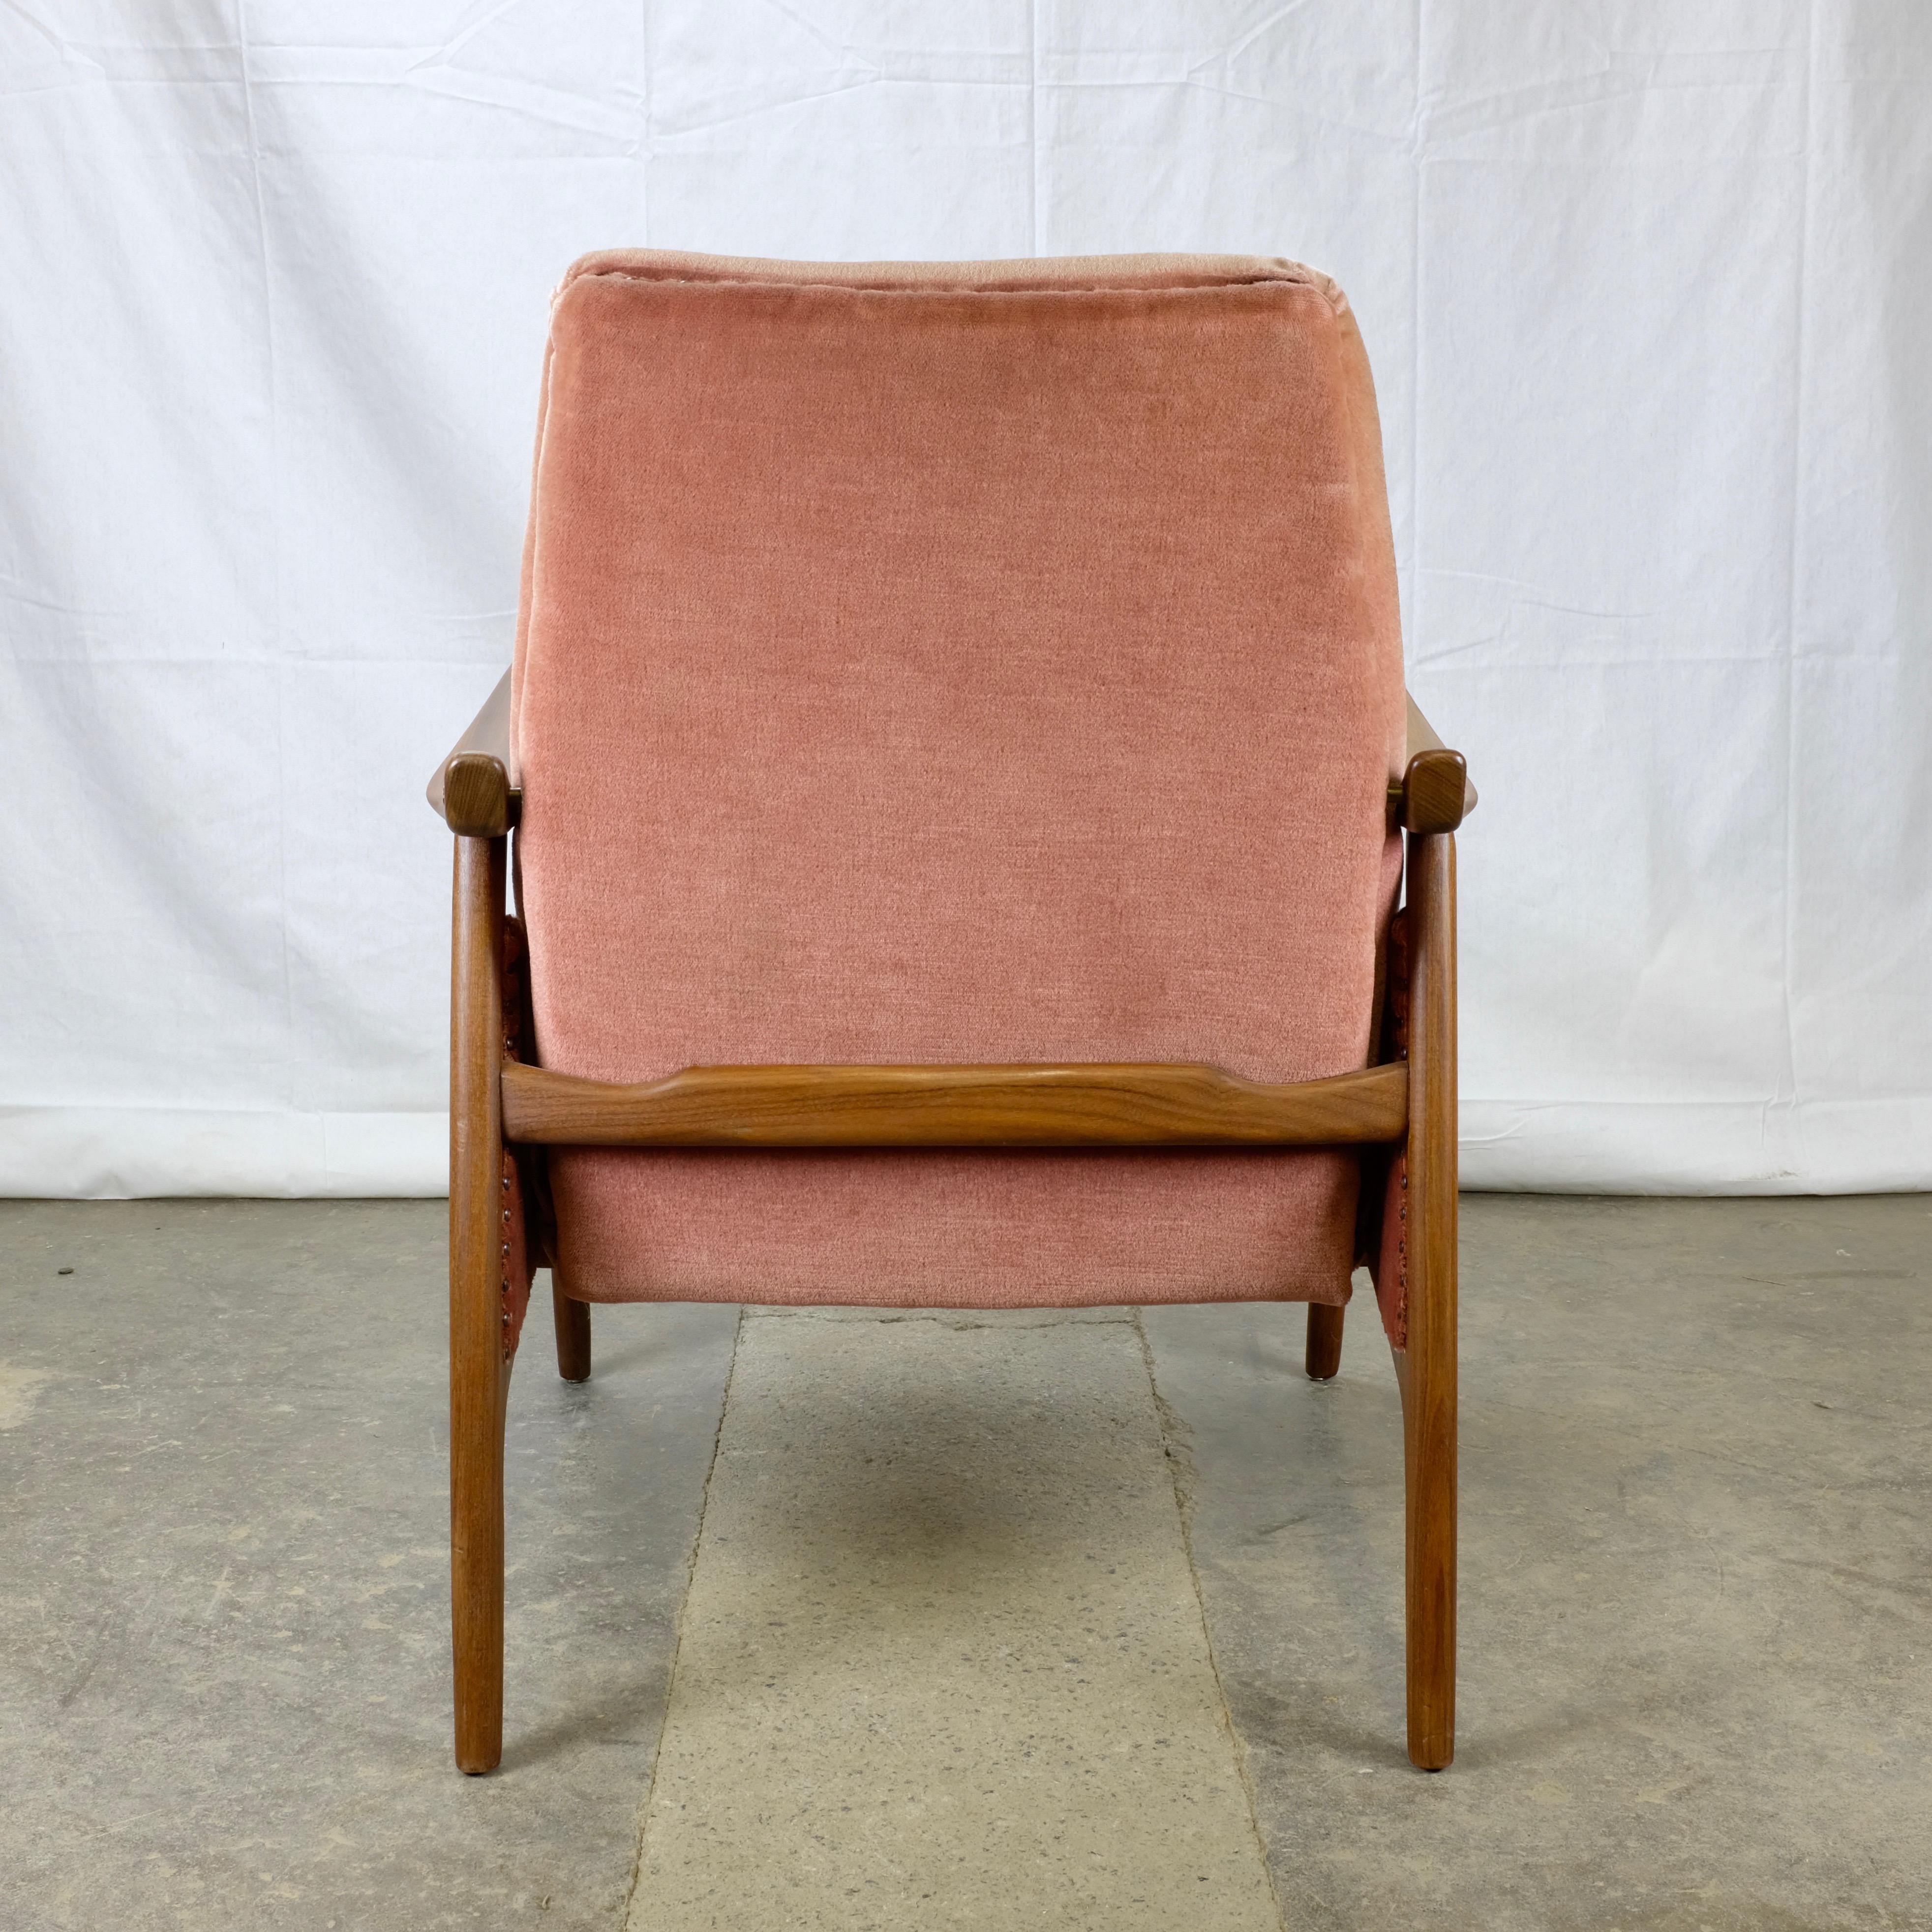 Teak Danish Modern Armchair with Velour Upholstery In Excellent Condition For Sale In Ottawa, ON